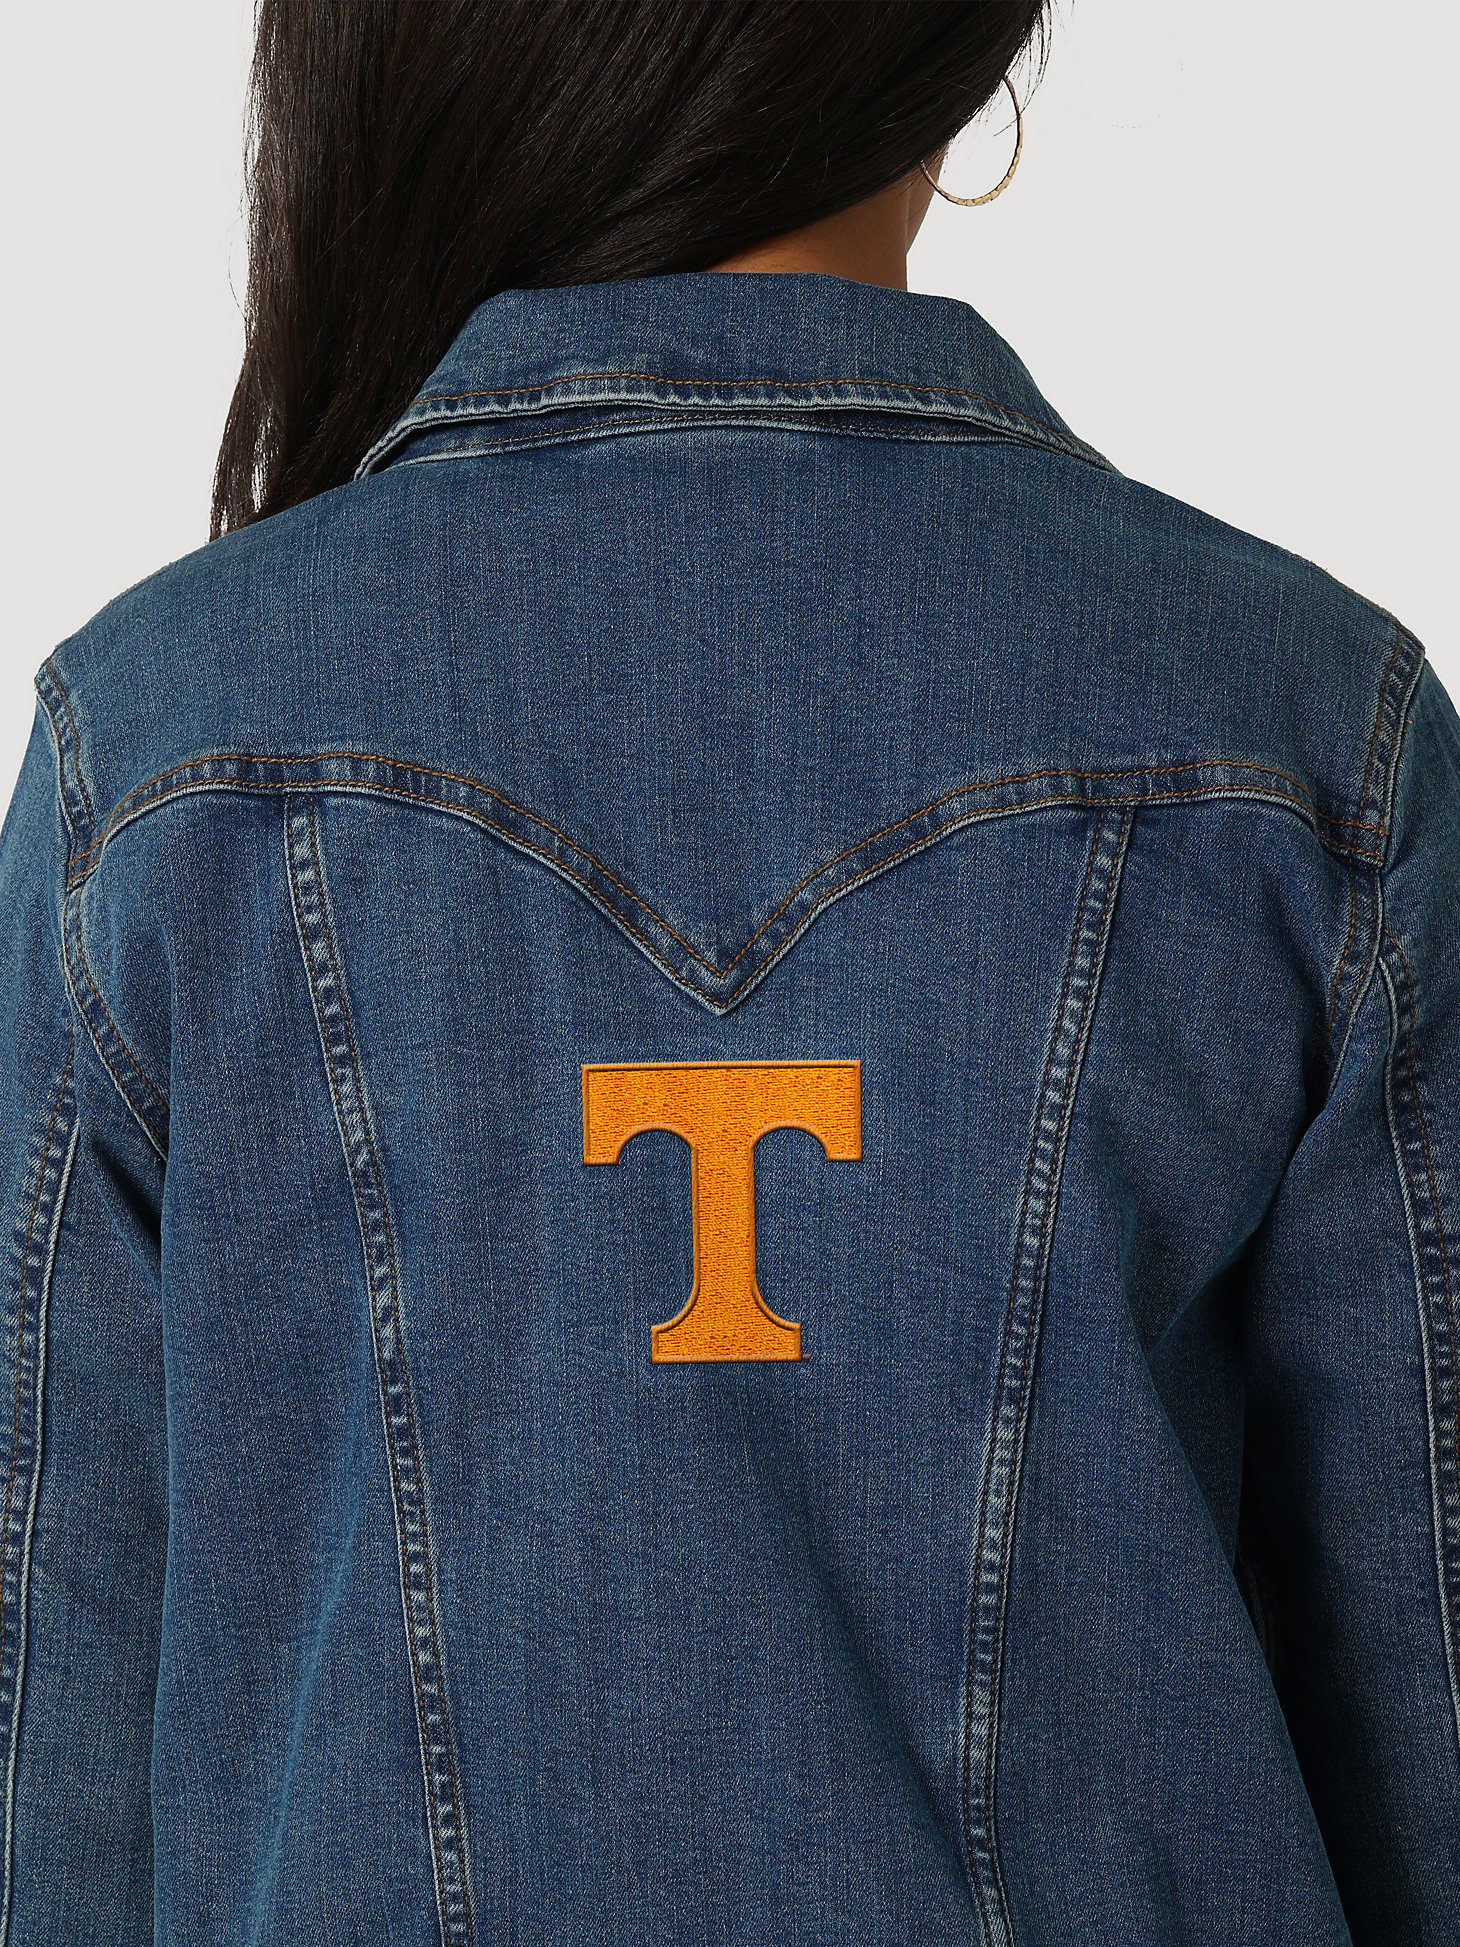 Women's Wrangler Collegiate Embroidered Classic Fit Denim Jacket in University of Tennessee alternative view 3